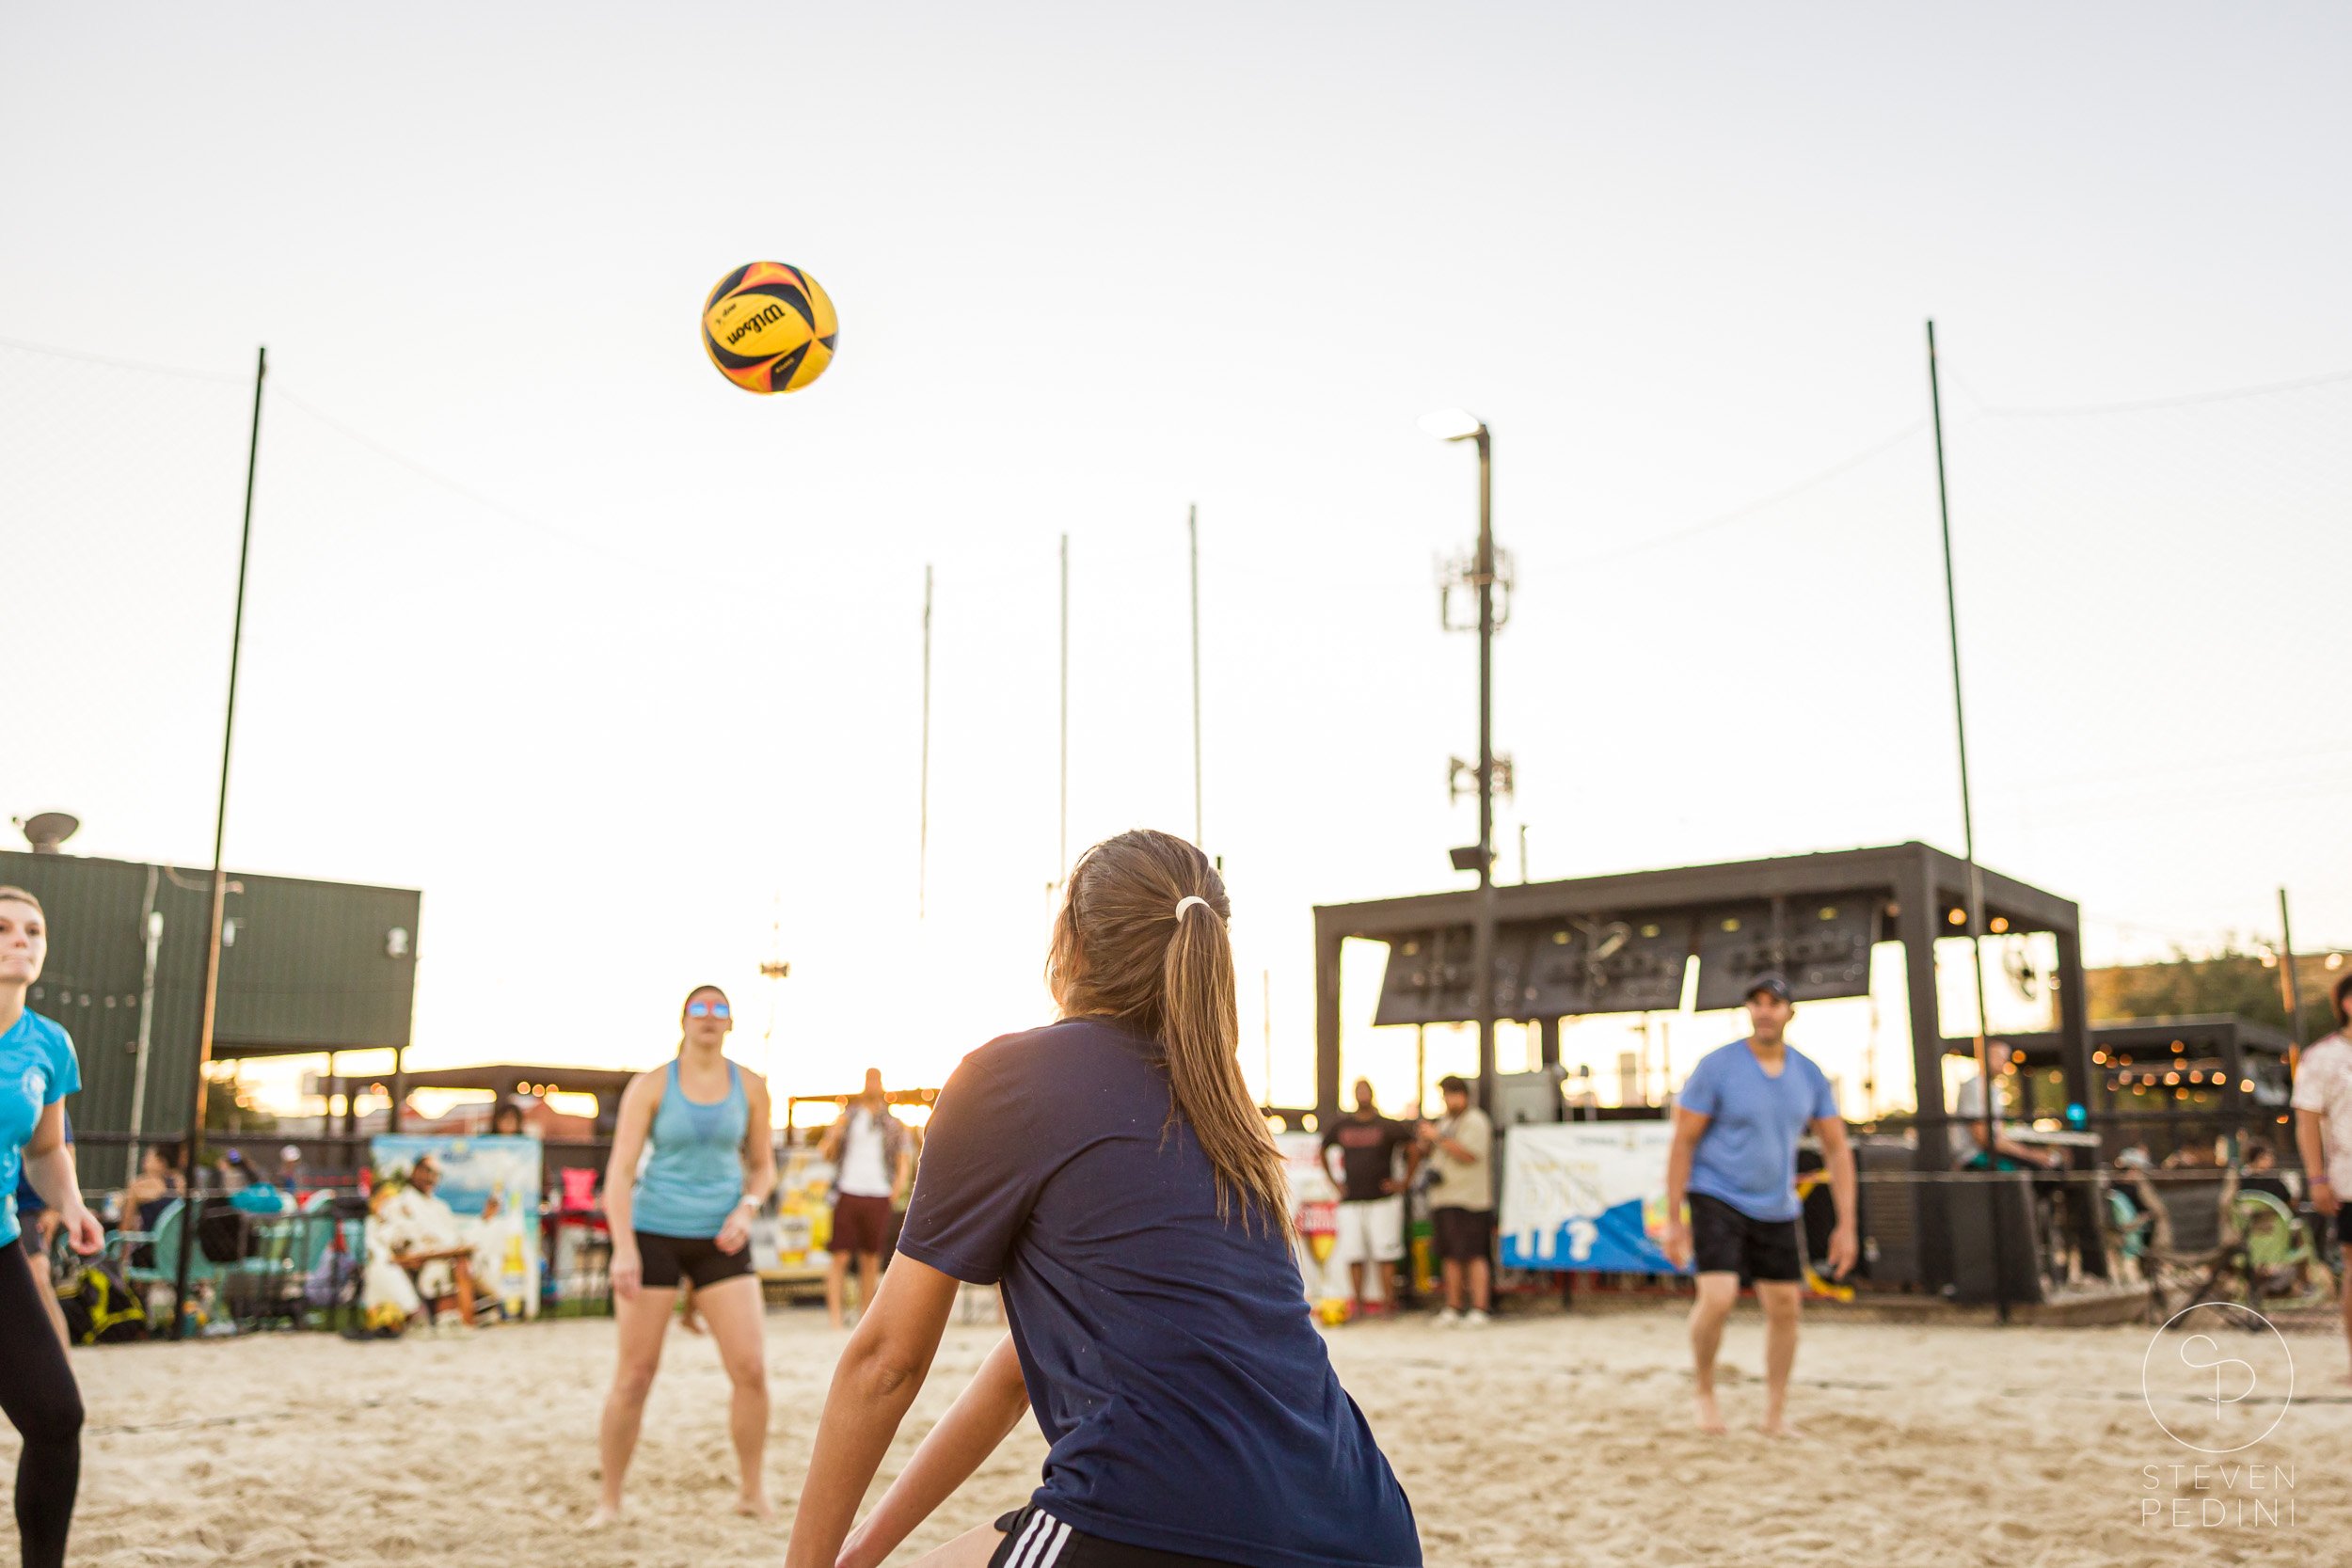 Steven Pedini Photography - Bumpy Pickle - Sand Volleyball - Houston TX - World Cup of Volleyball - 00216.jpg